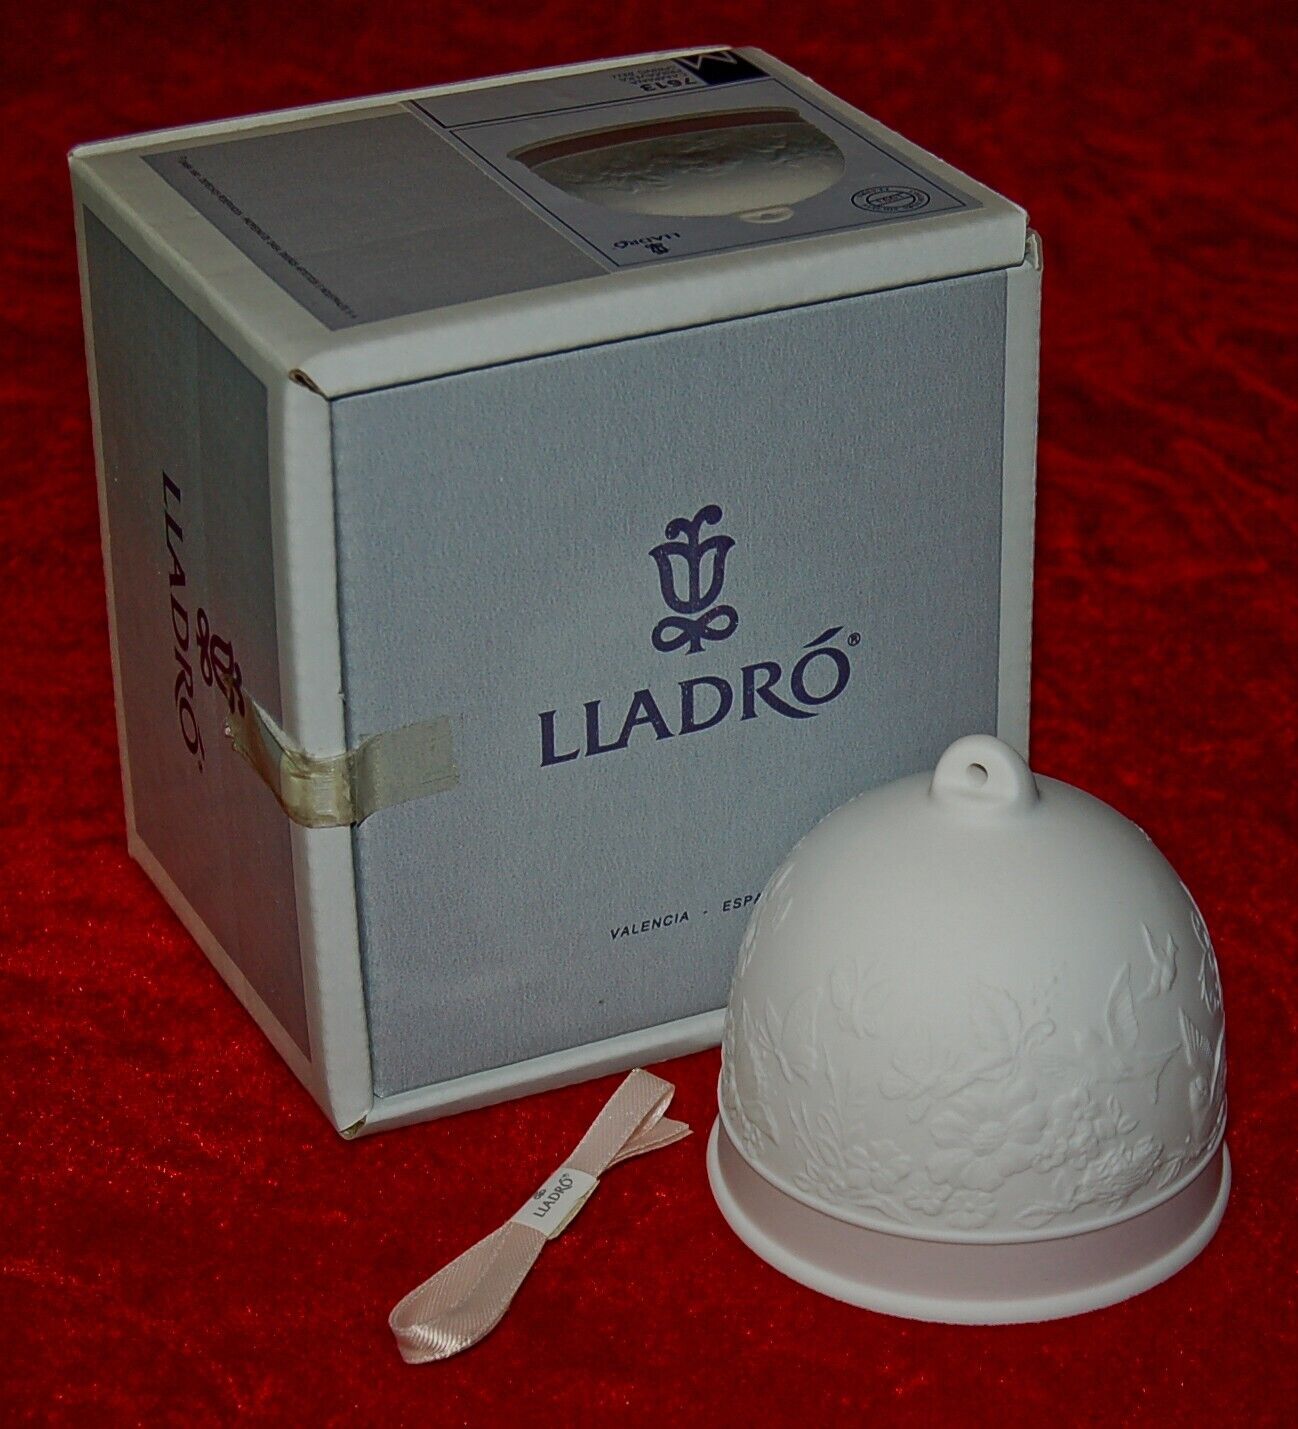 LLADRO Porcelain SPRING BELL #7613 New In Original Box Made in Spain